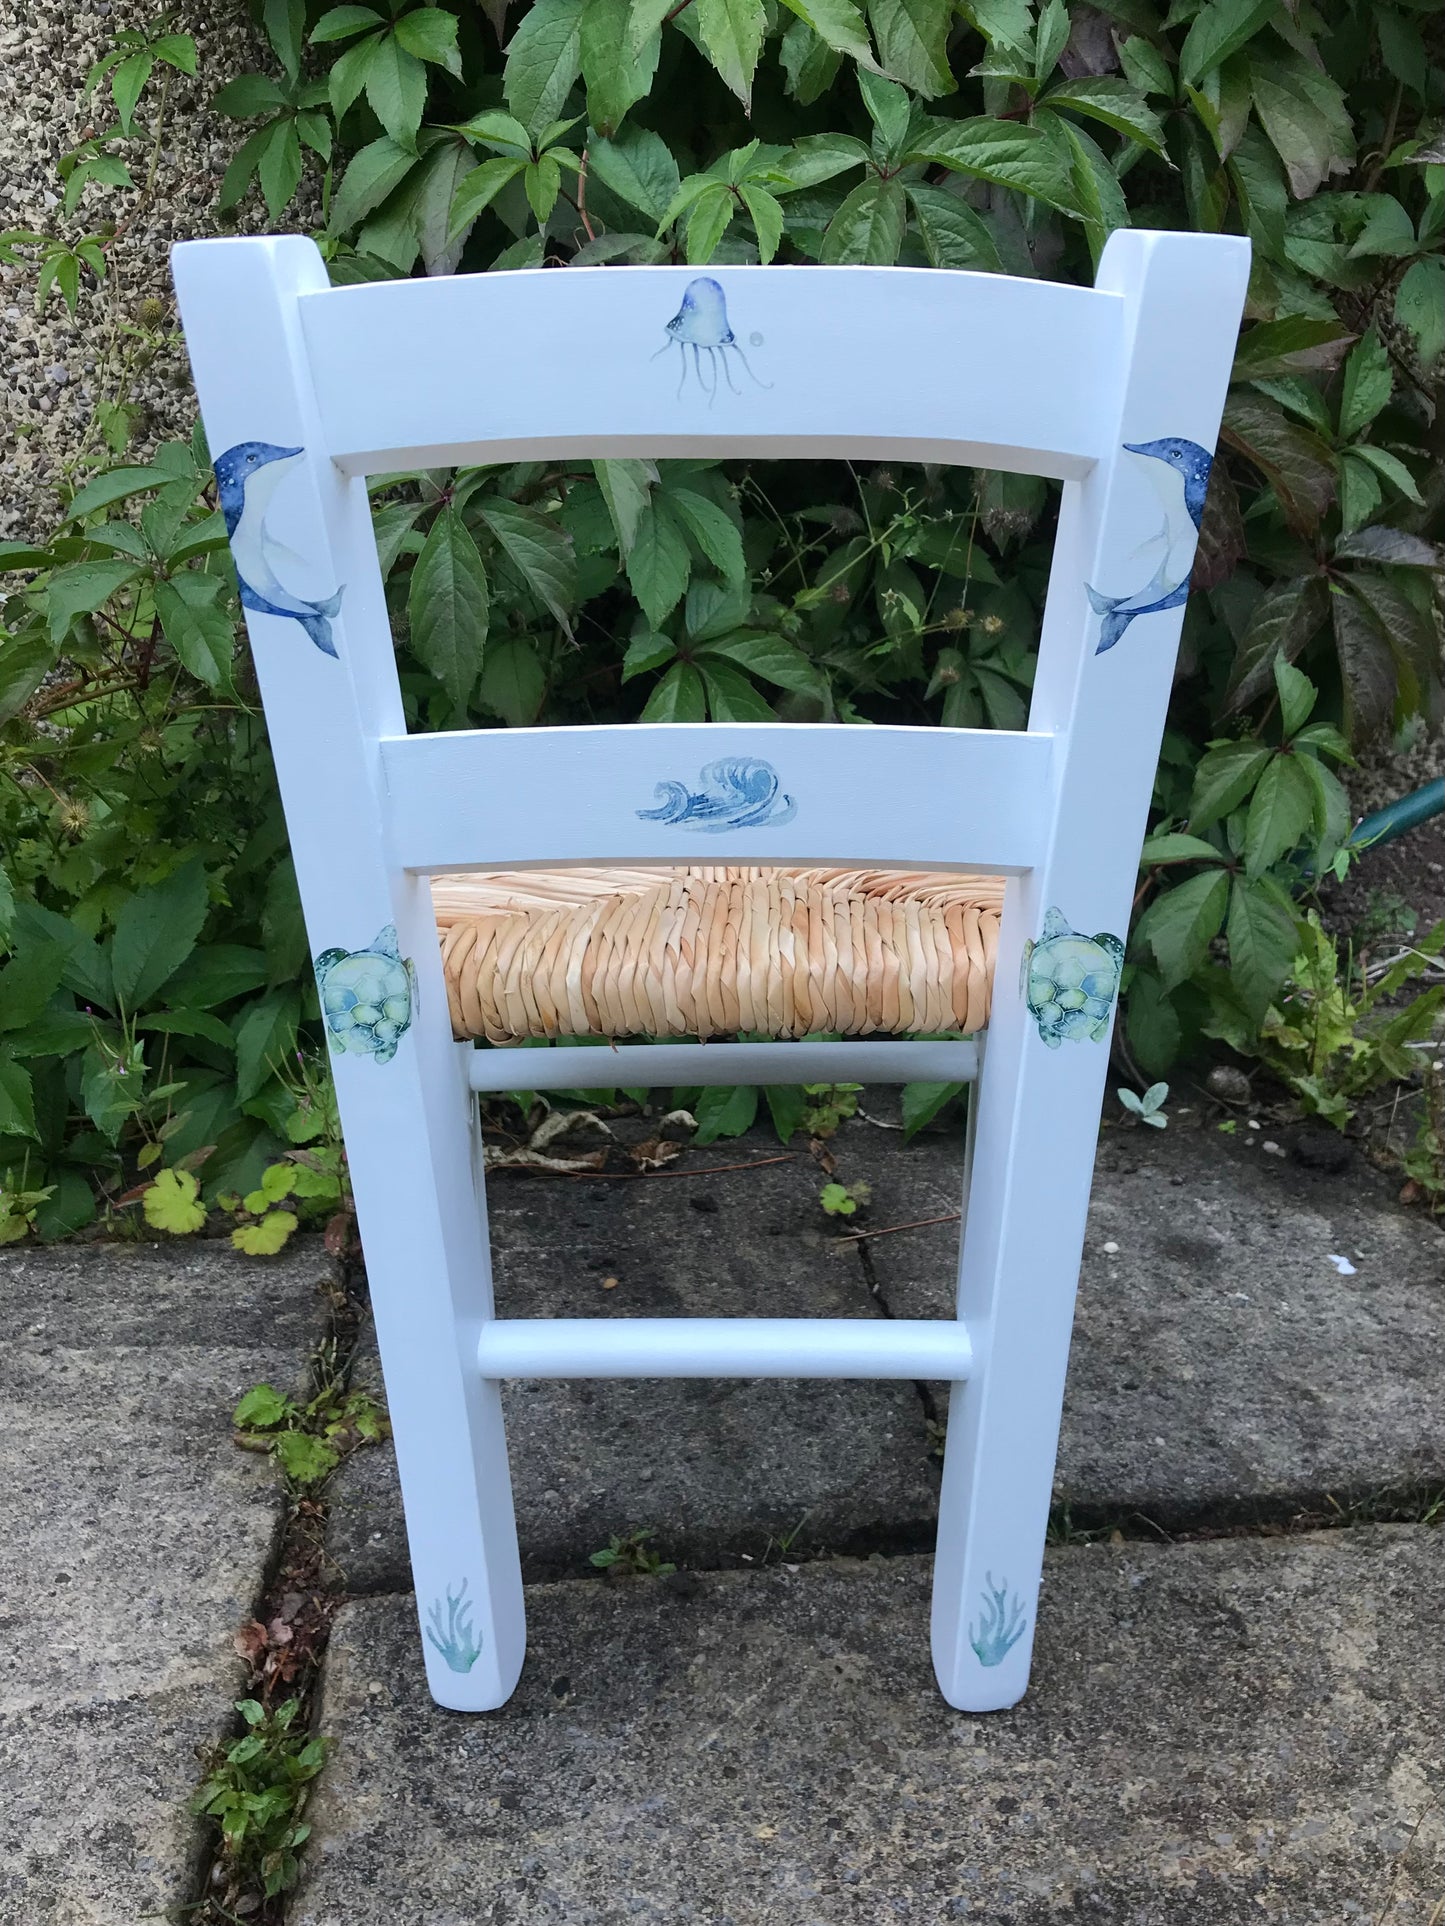 Rush seat personalised children's chair - Under the sea theme - made to order